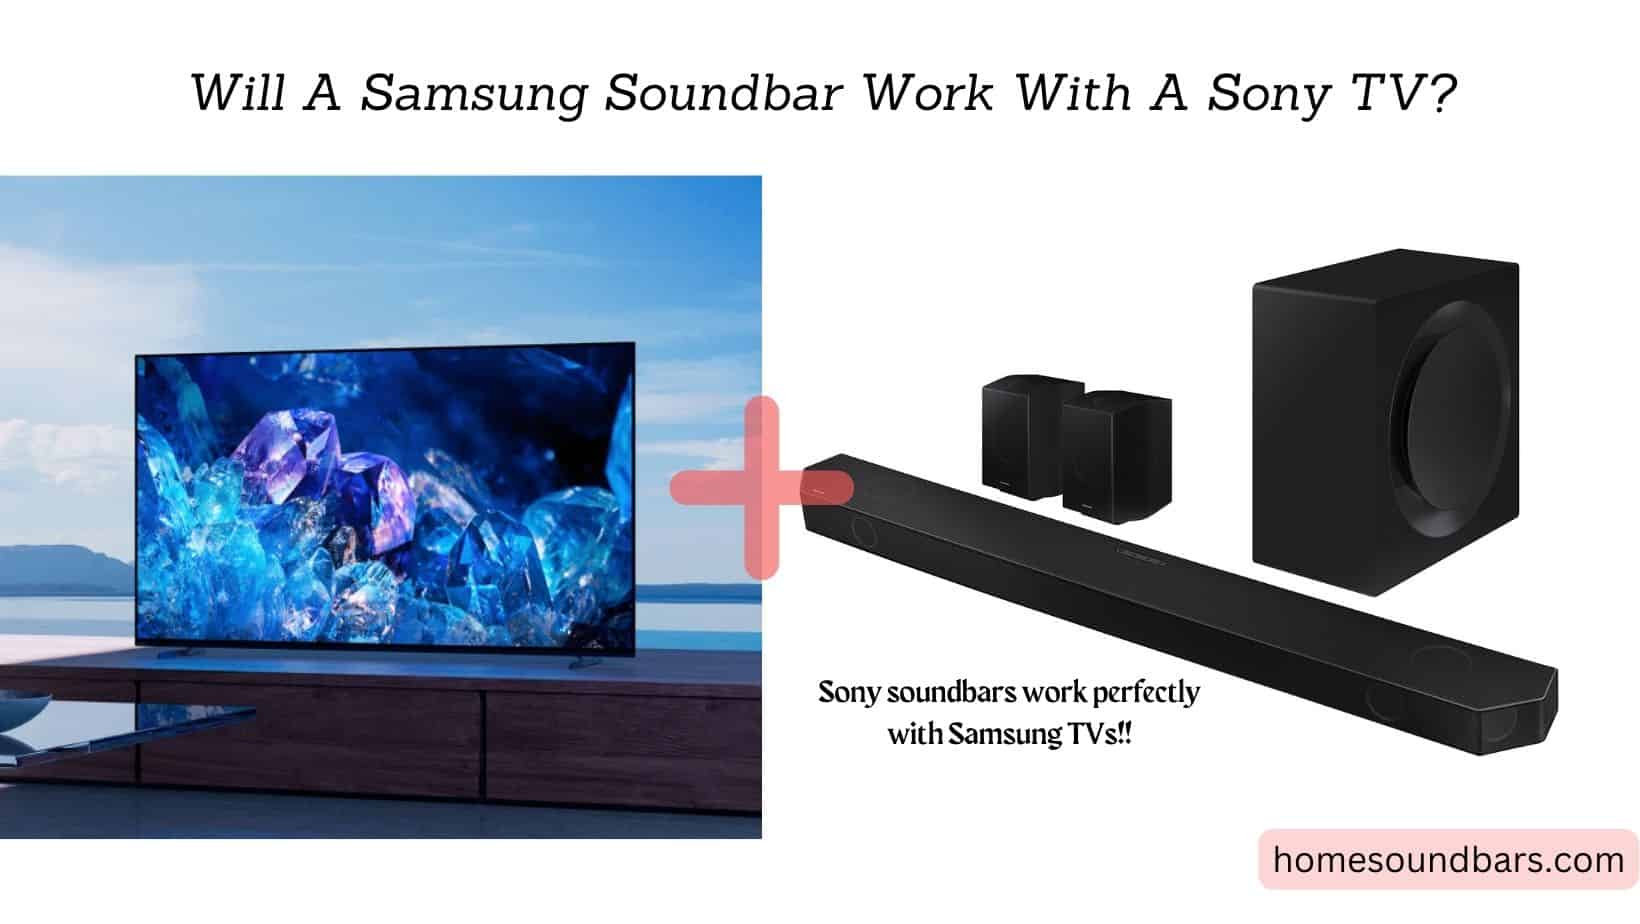 Are Sony TVs compatible with Samsung sound bar?